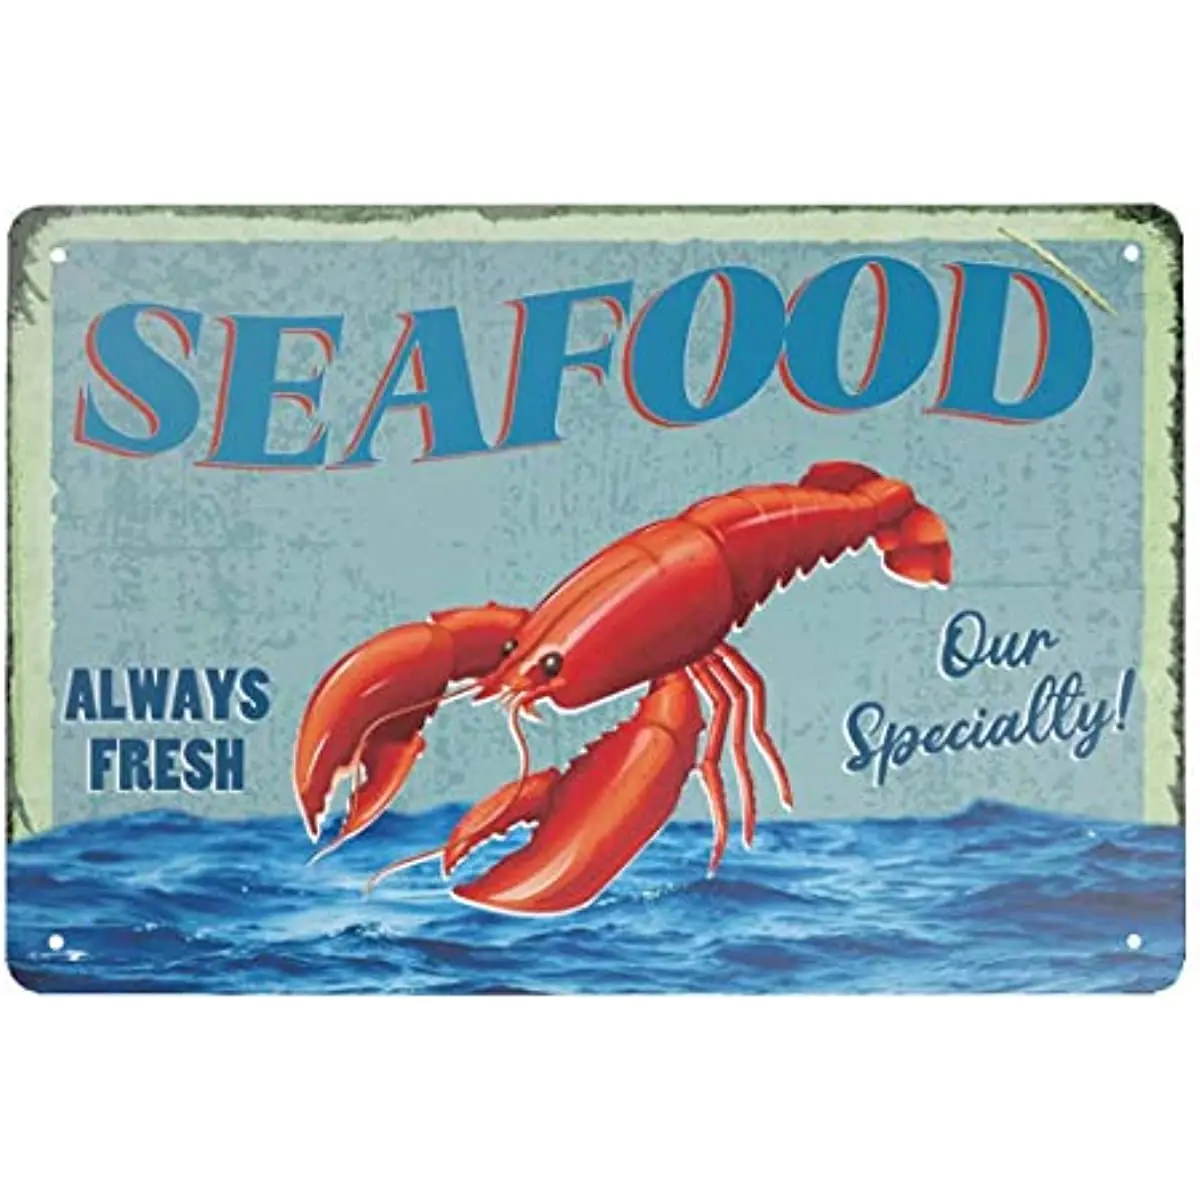 

Retro Tin Sign Vintage Metal Sign Seafood Always Fresh Our Specialty!Wall Poster Plaque for Home Kitchen Bar Coffee Shop 12x8 In